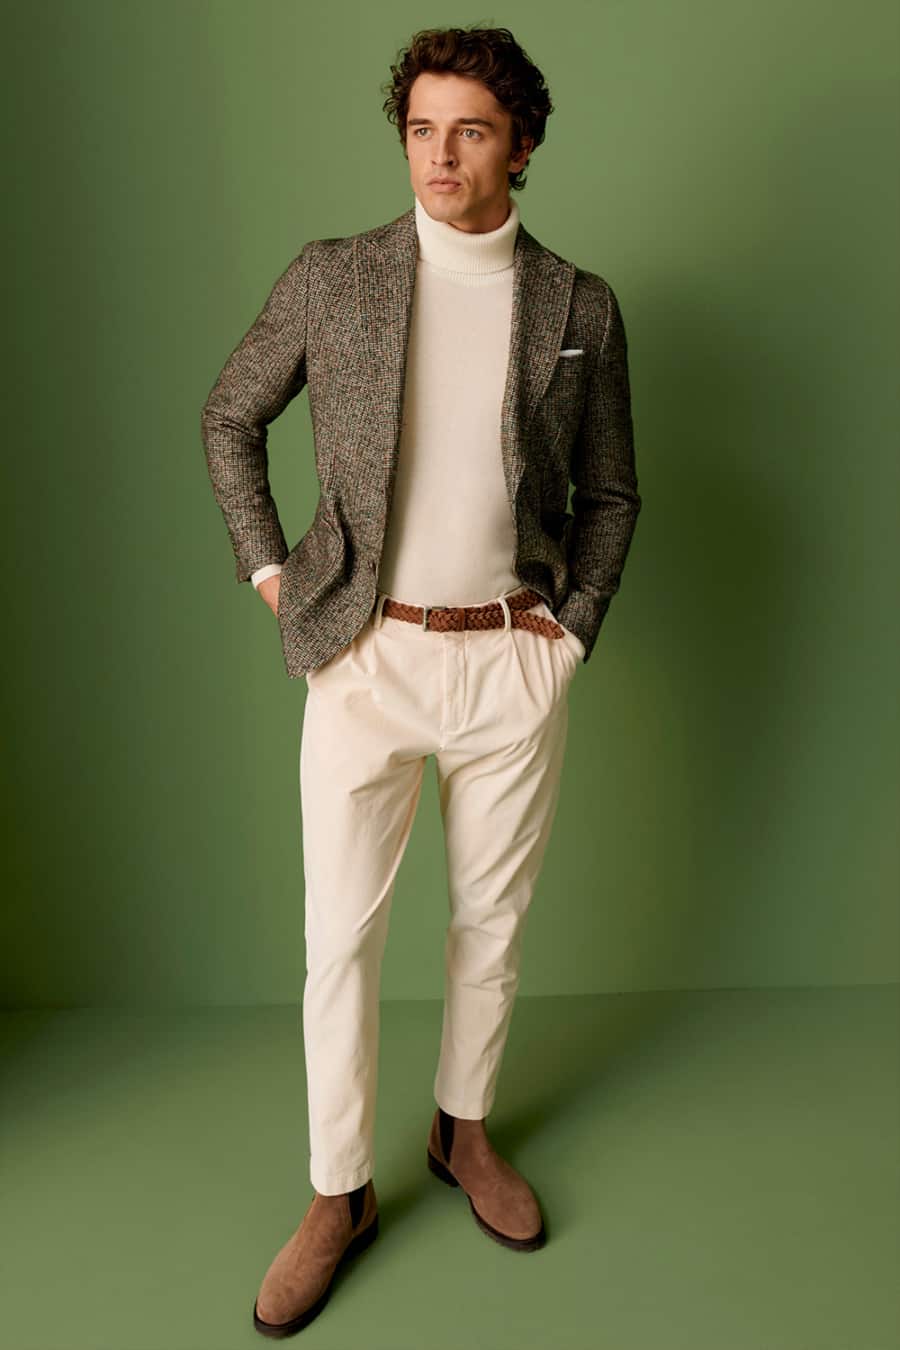 Men's cream pleated trousers, cream turtleneck, brown blazer and chelsea boots outfit